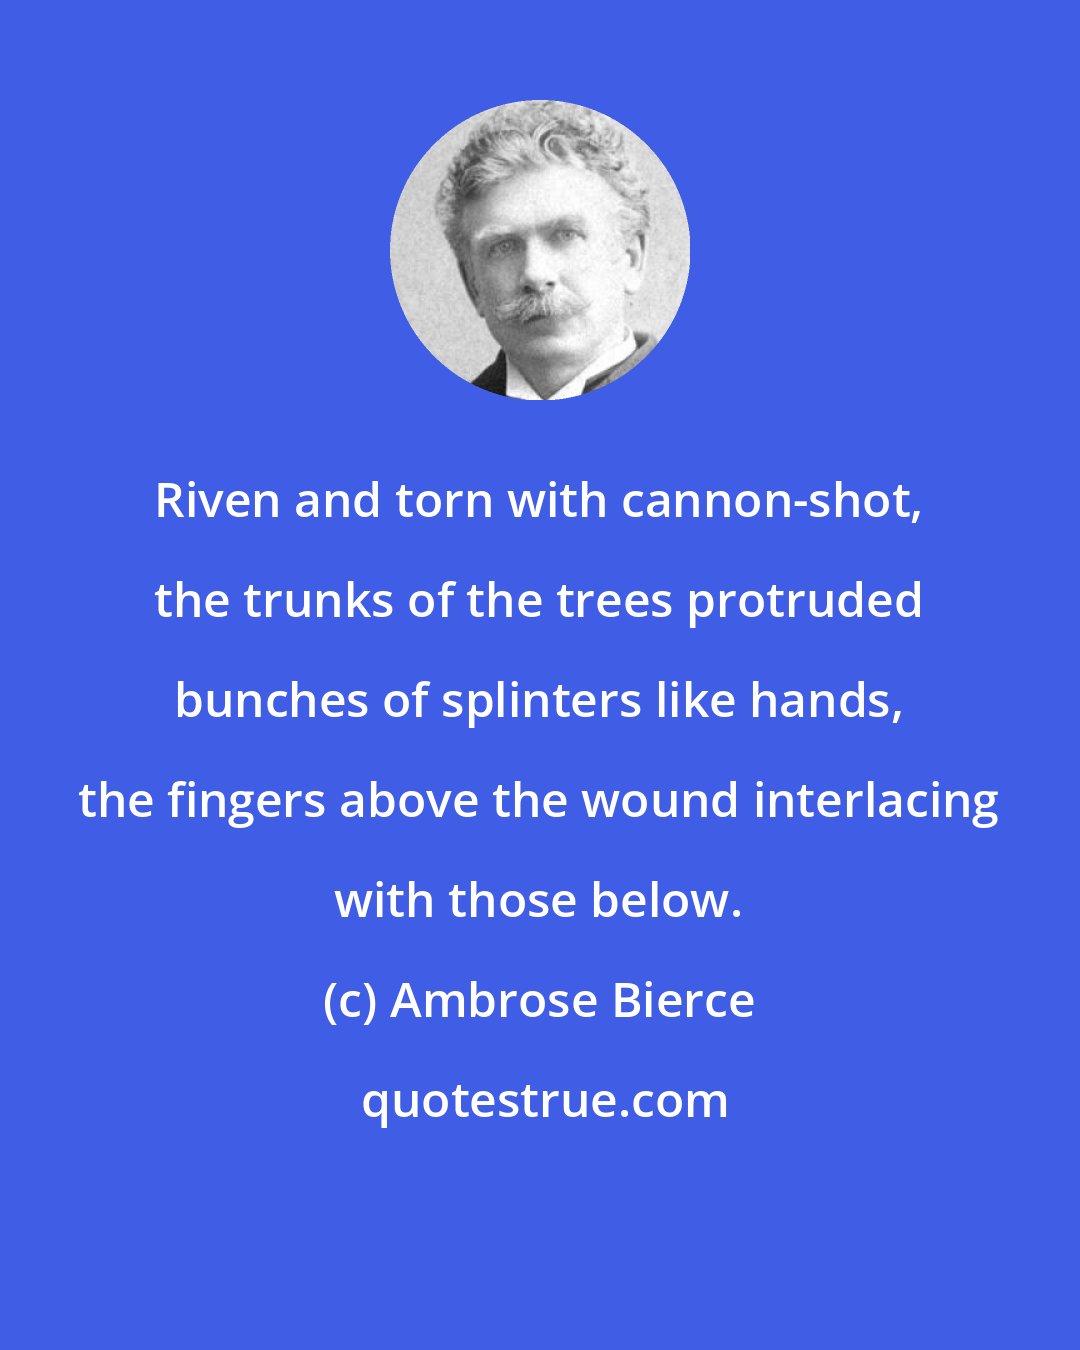 Ambrose Bierce: Riven and torn with cannon-shot, the trunks of the trees protruded bunches of splinters like hands, the fingers above the wound interlacing with those below.